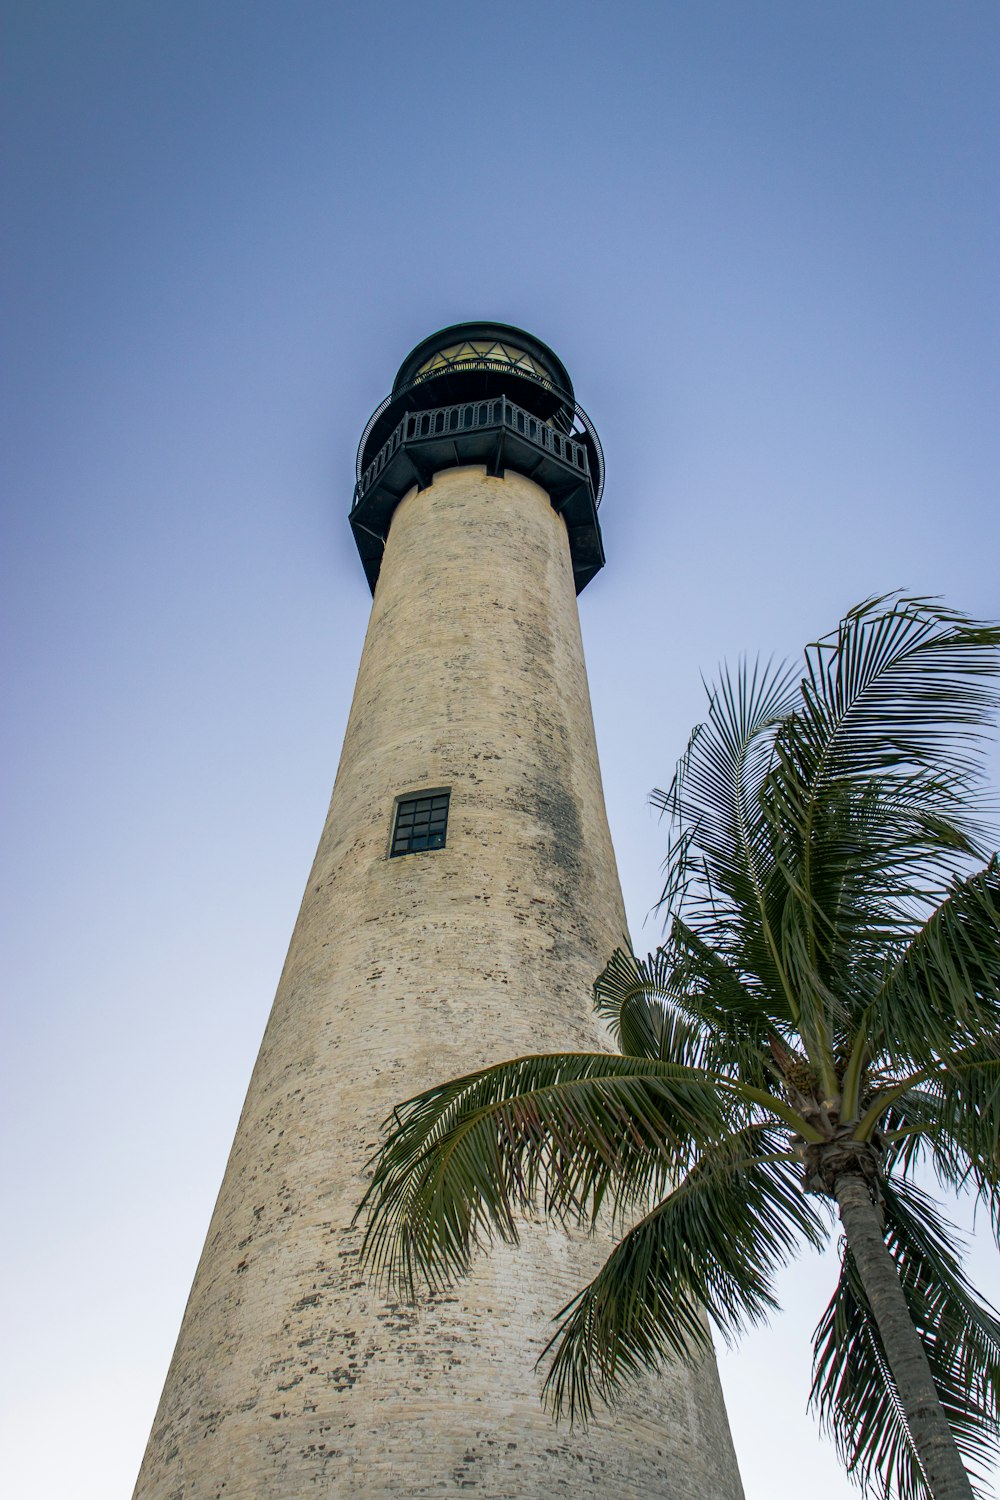 a tall tower with a clock on top next to a palm tree